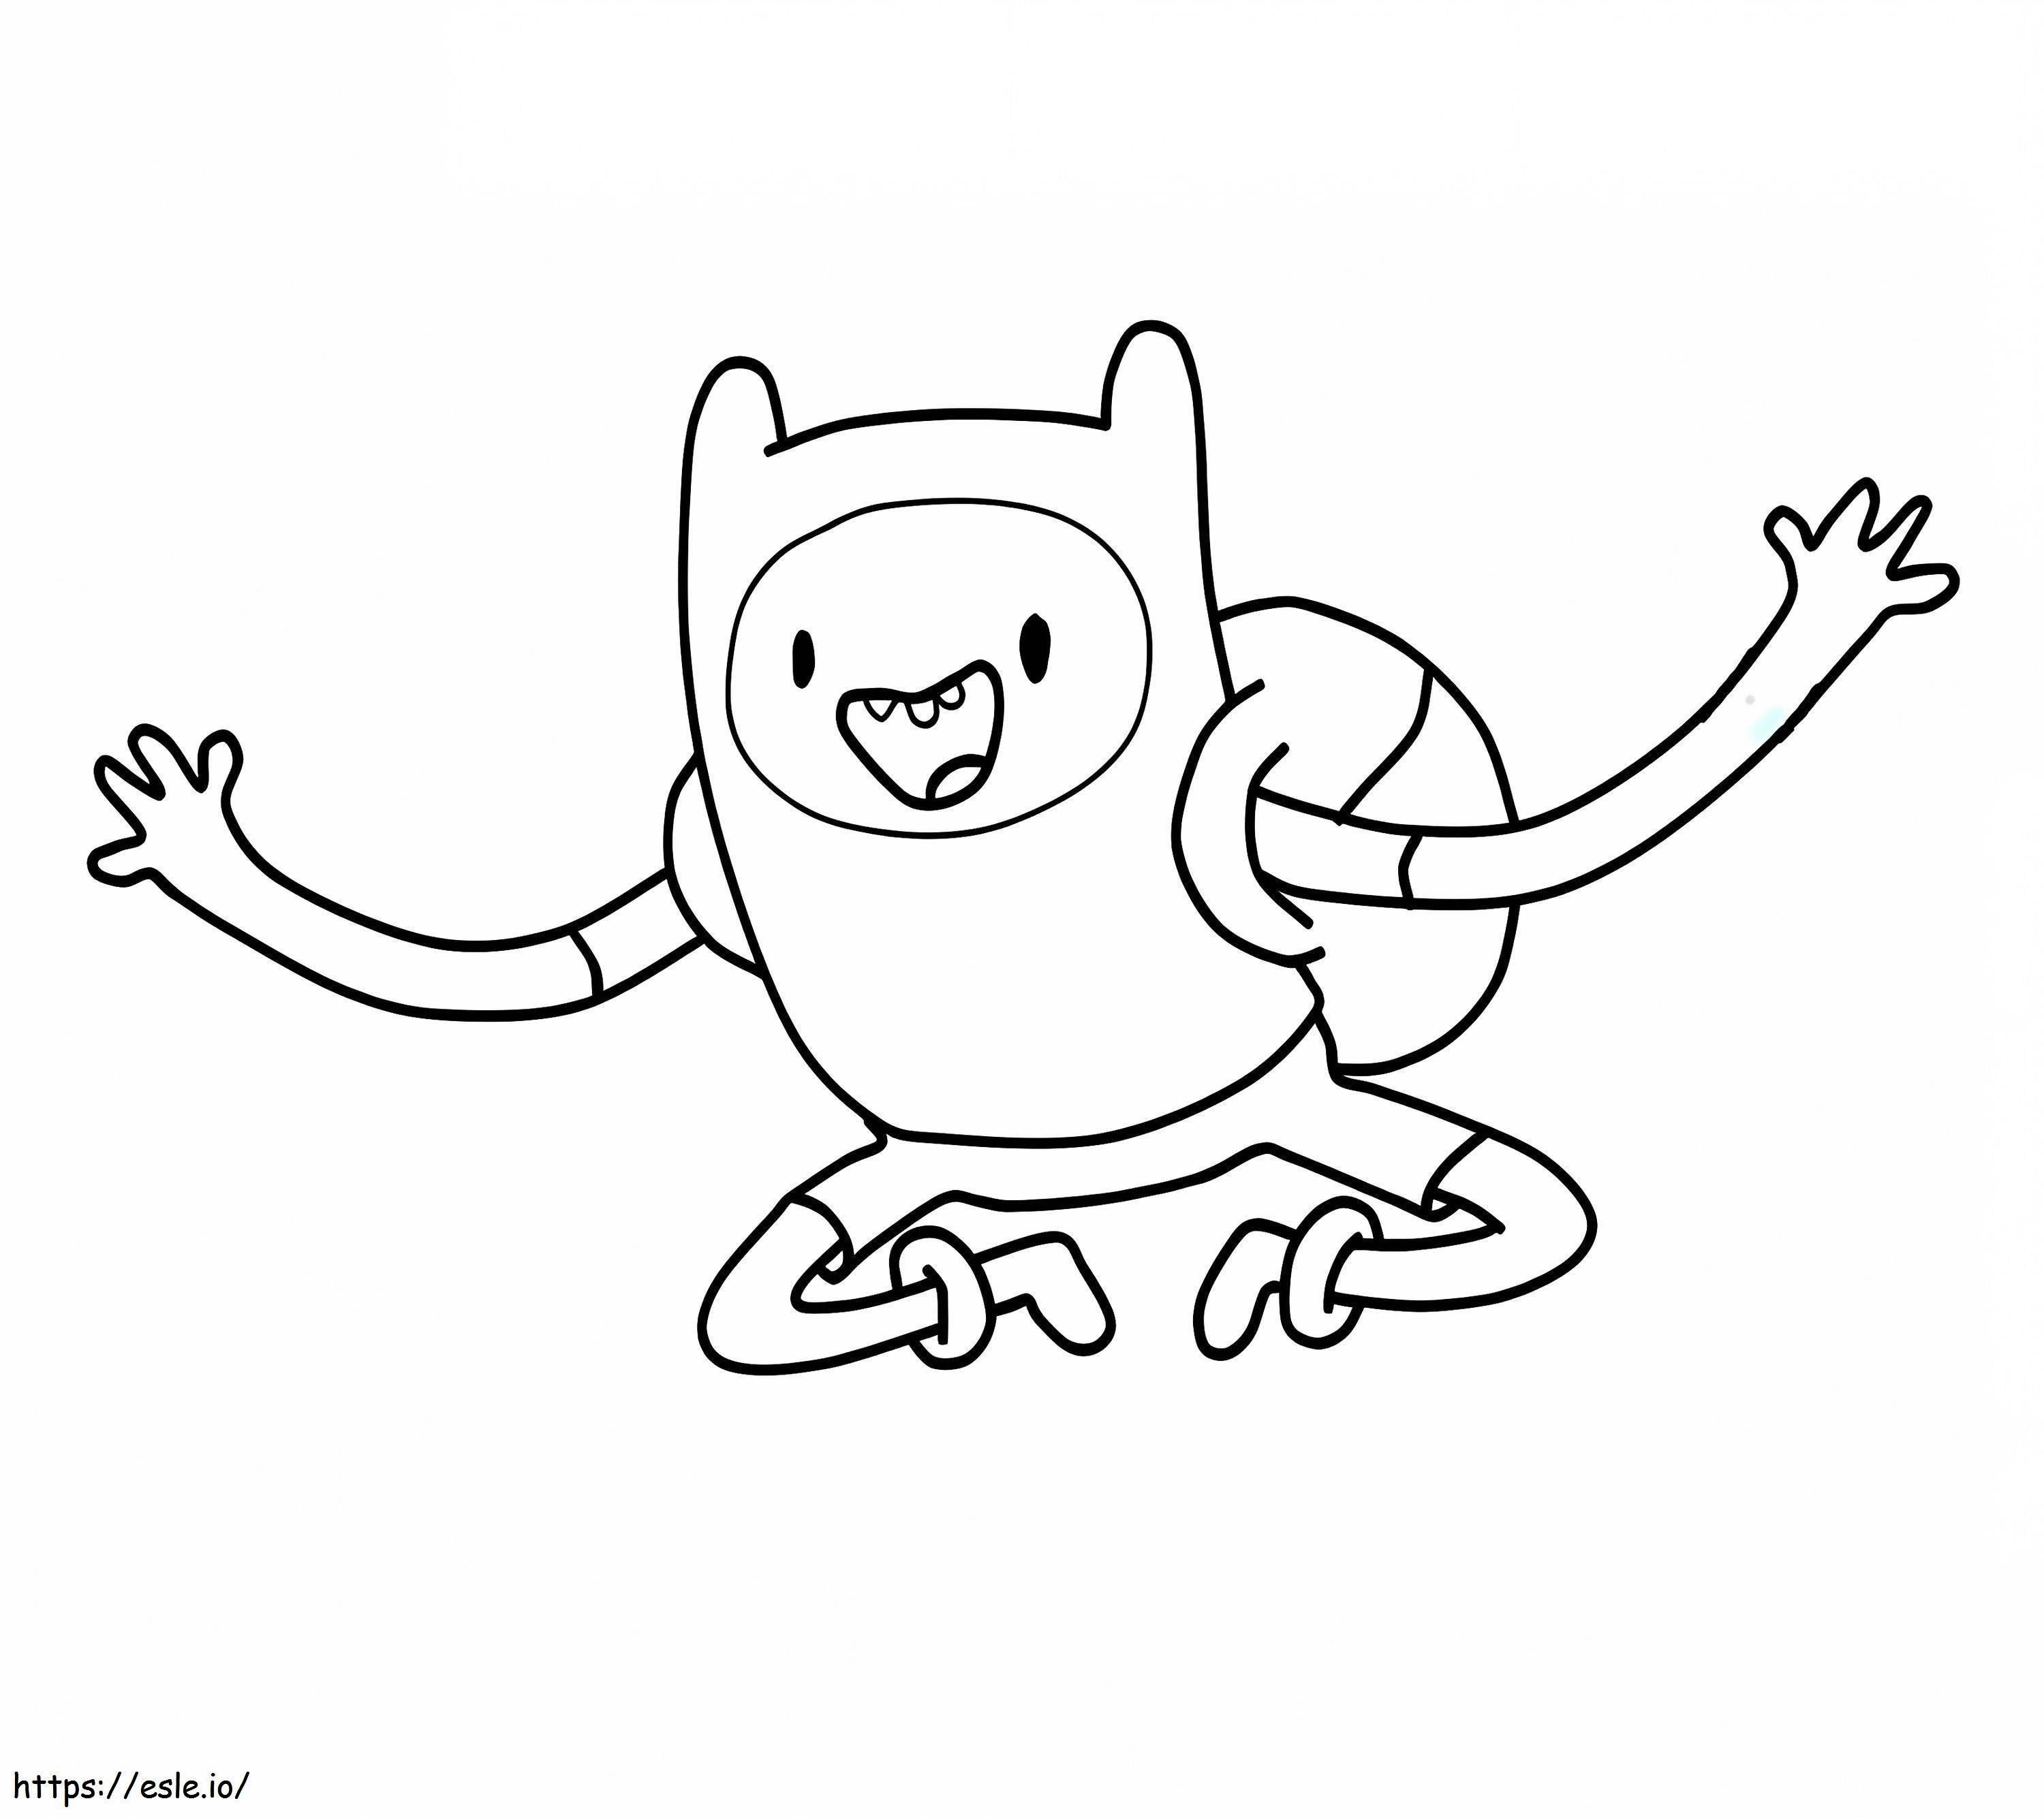 Find Smiling coloring page